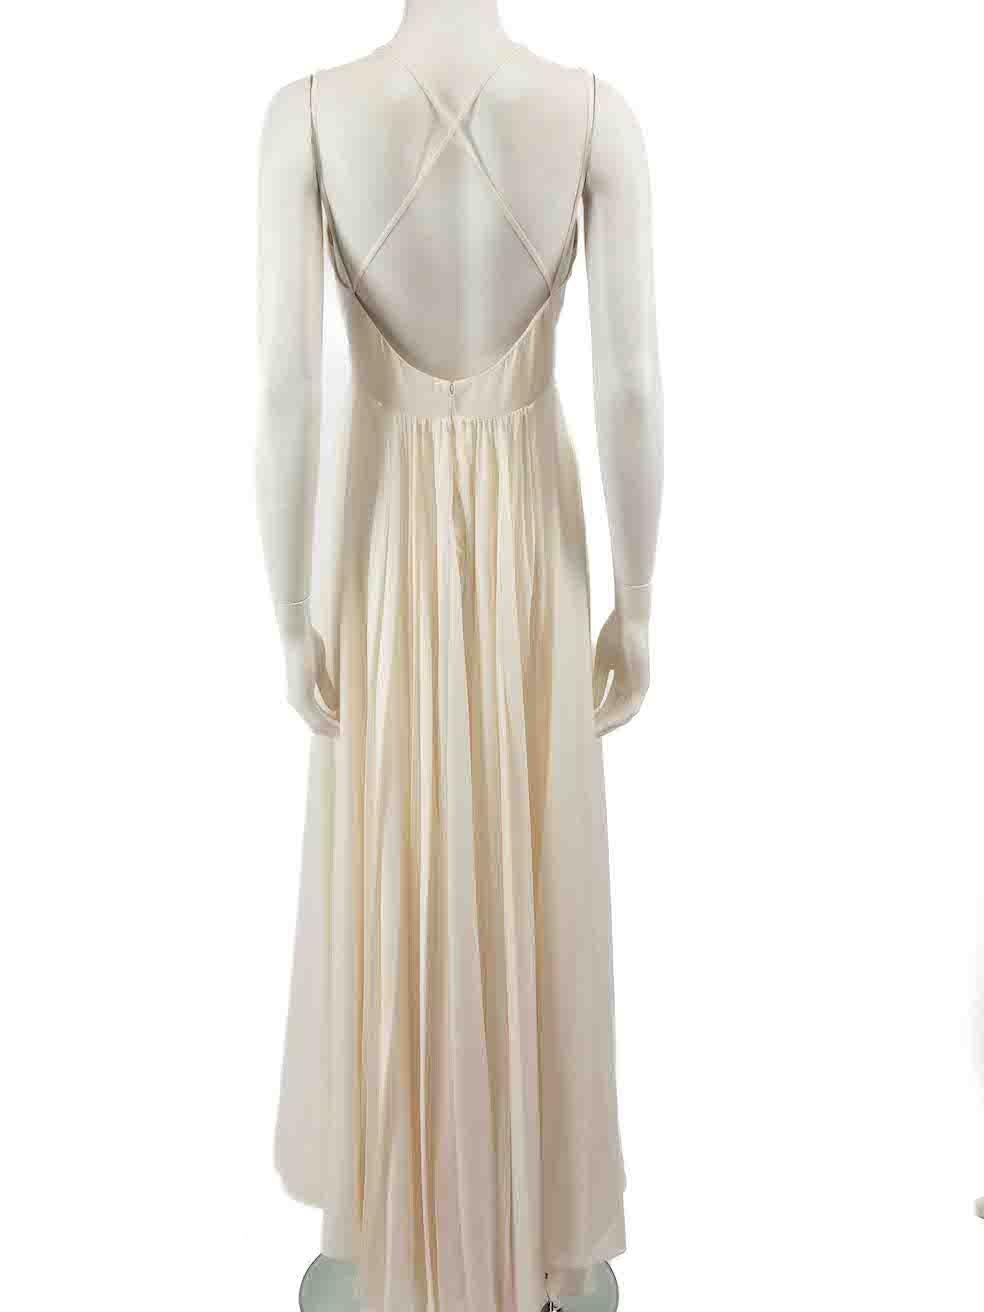 Jonathan Simkhai Ecru Lace Trim Pleated Maxi Dress Size S In Good Condition For Sale In London, GB